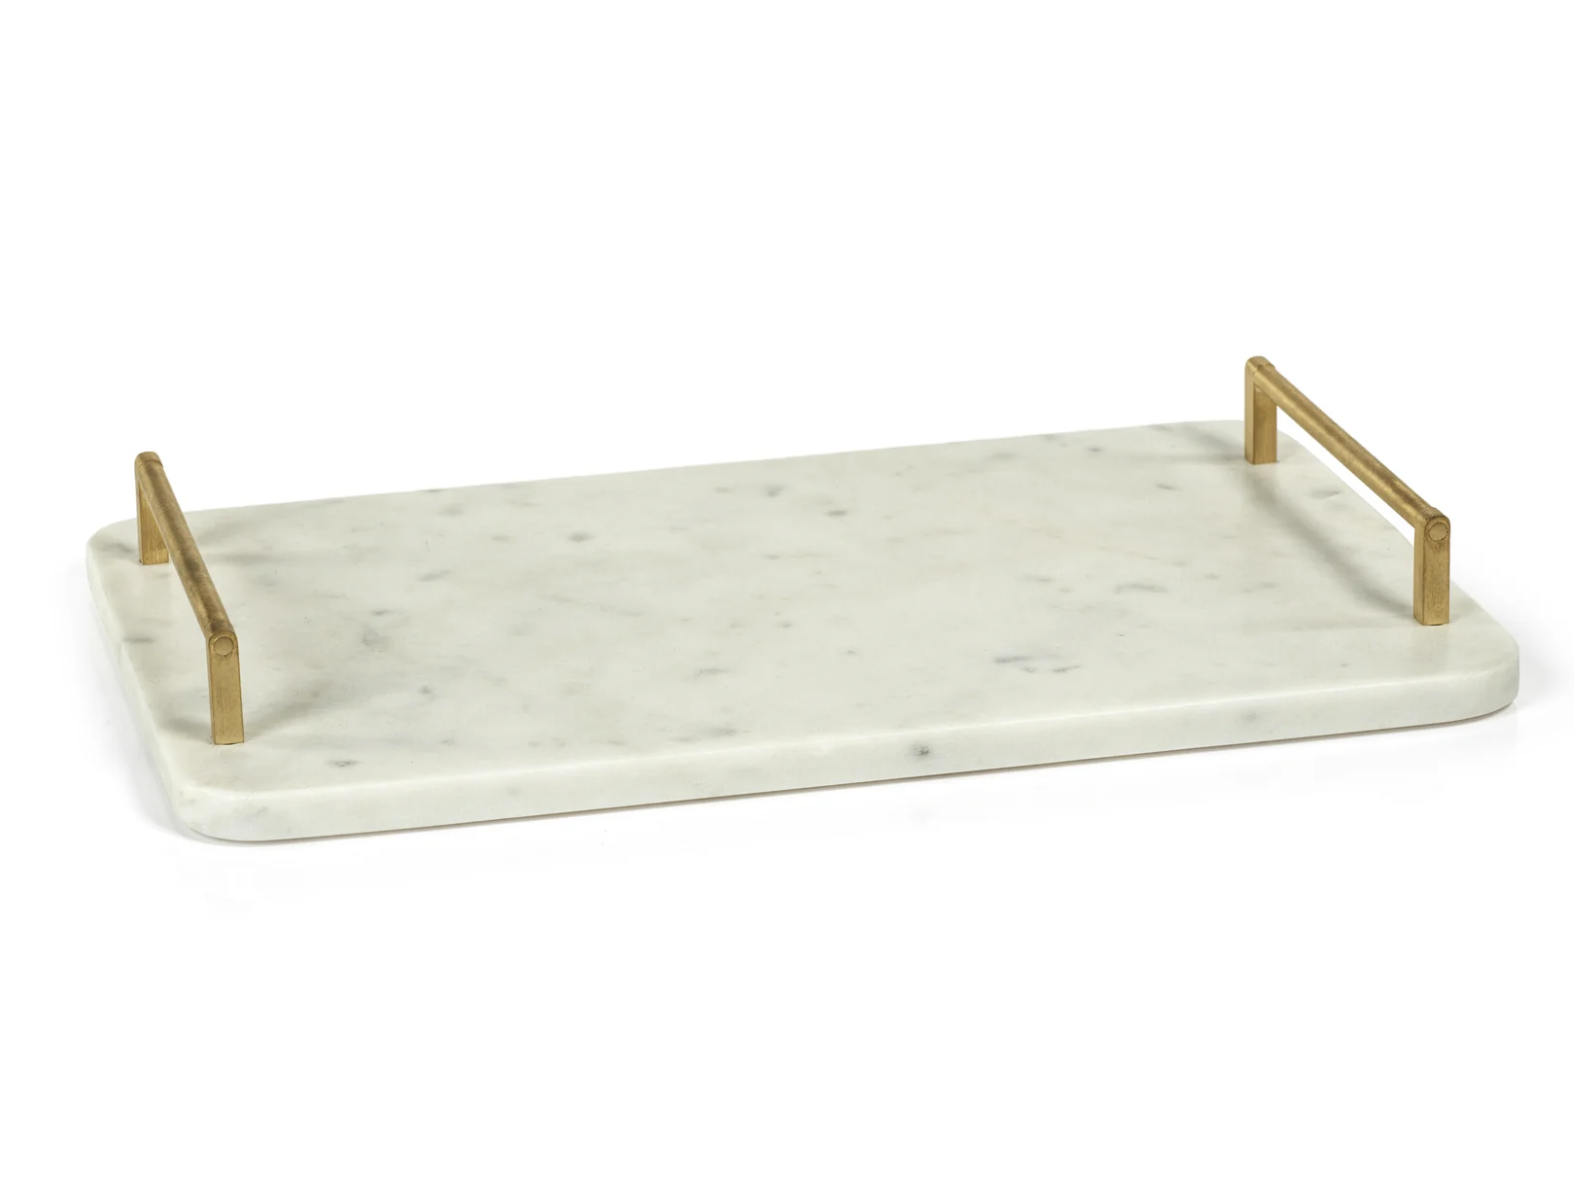 ZODAX ANDRIA MARBLE TRAY W/ GOLD METAL HANDLES